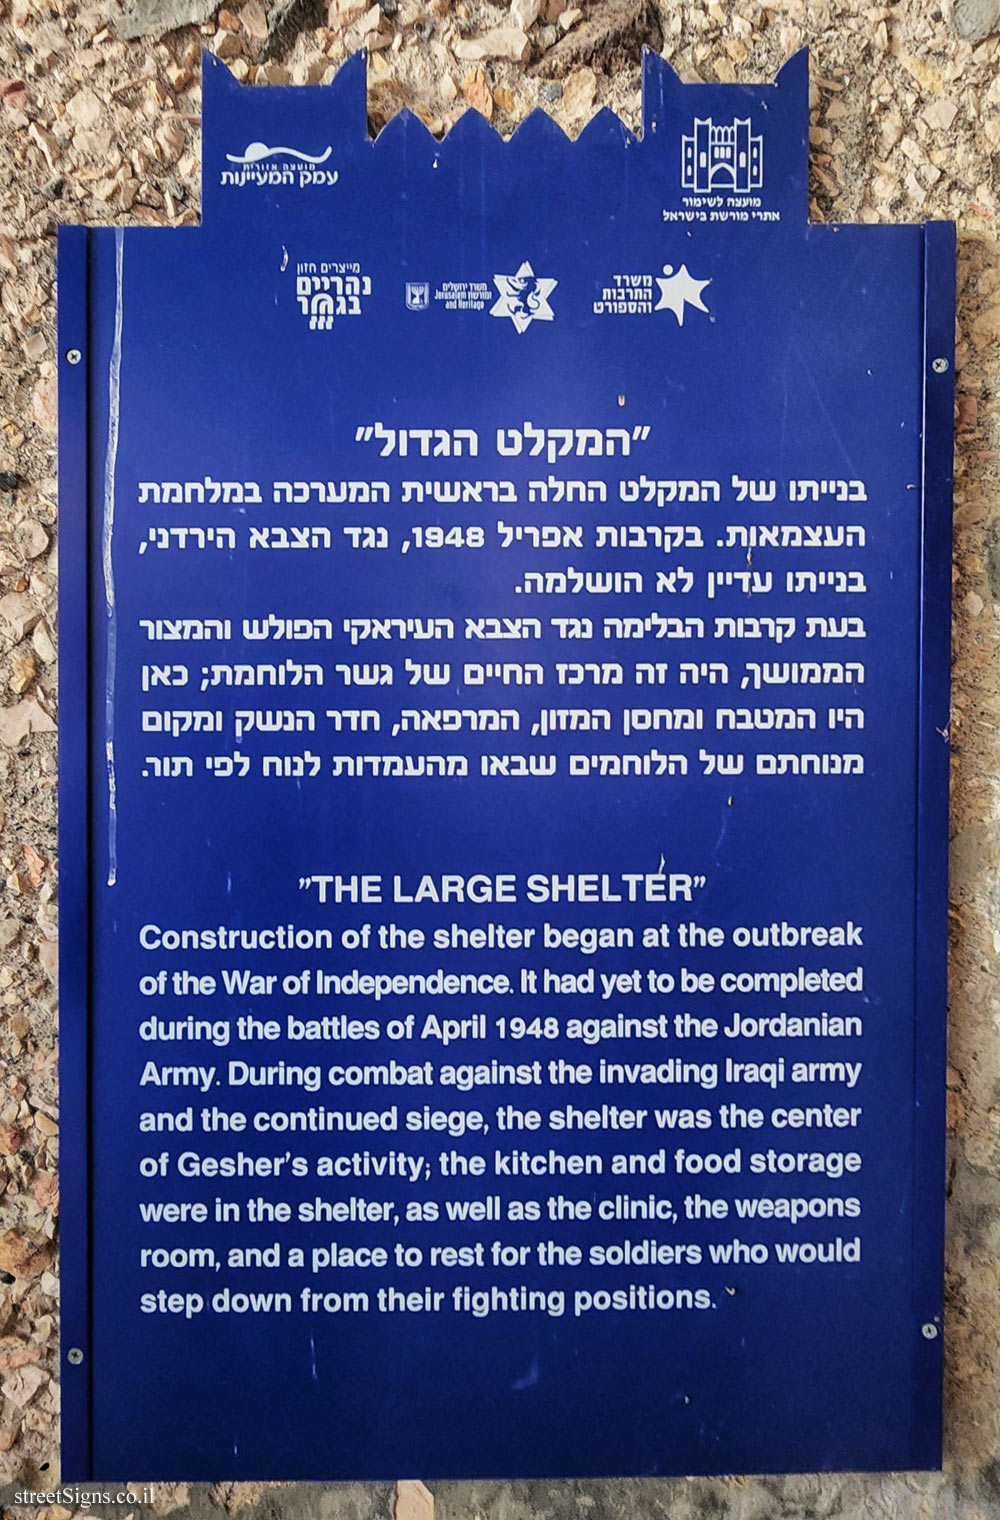 Gesher - the old Gesher - "The Large Shelter"